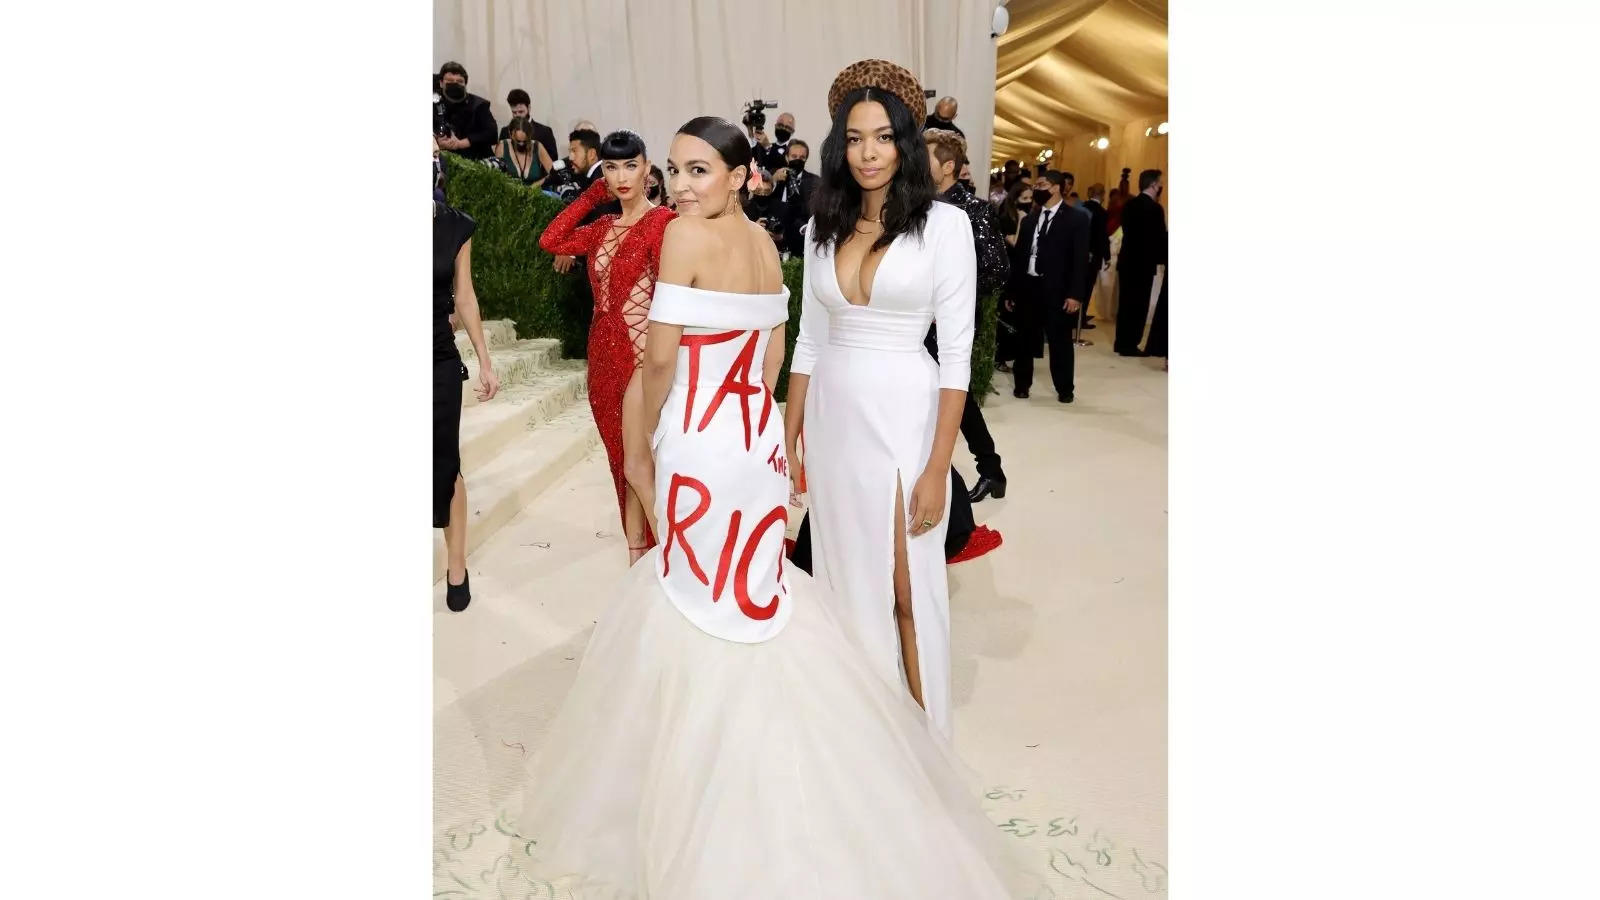 Met Gala returns after pandemic cancellation